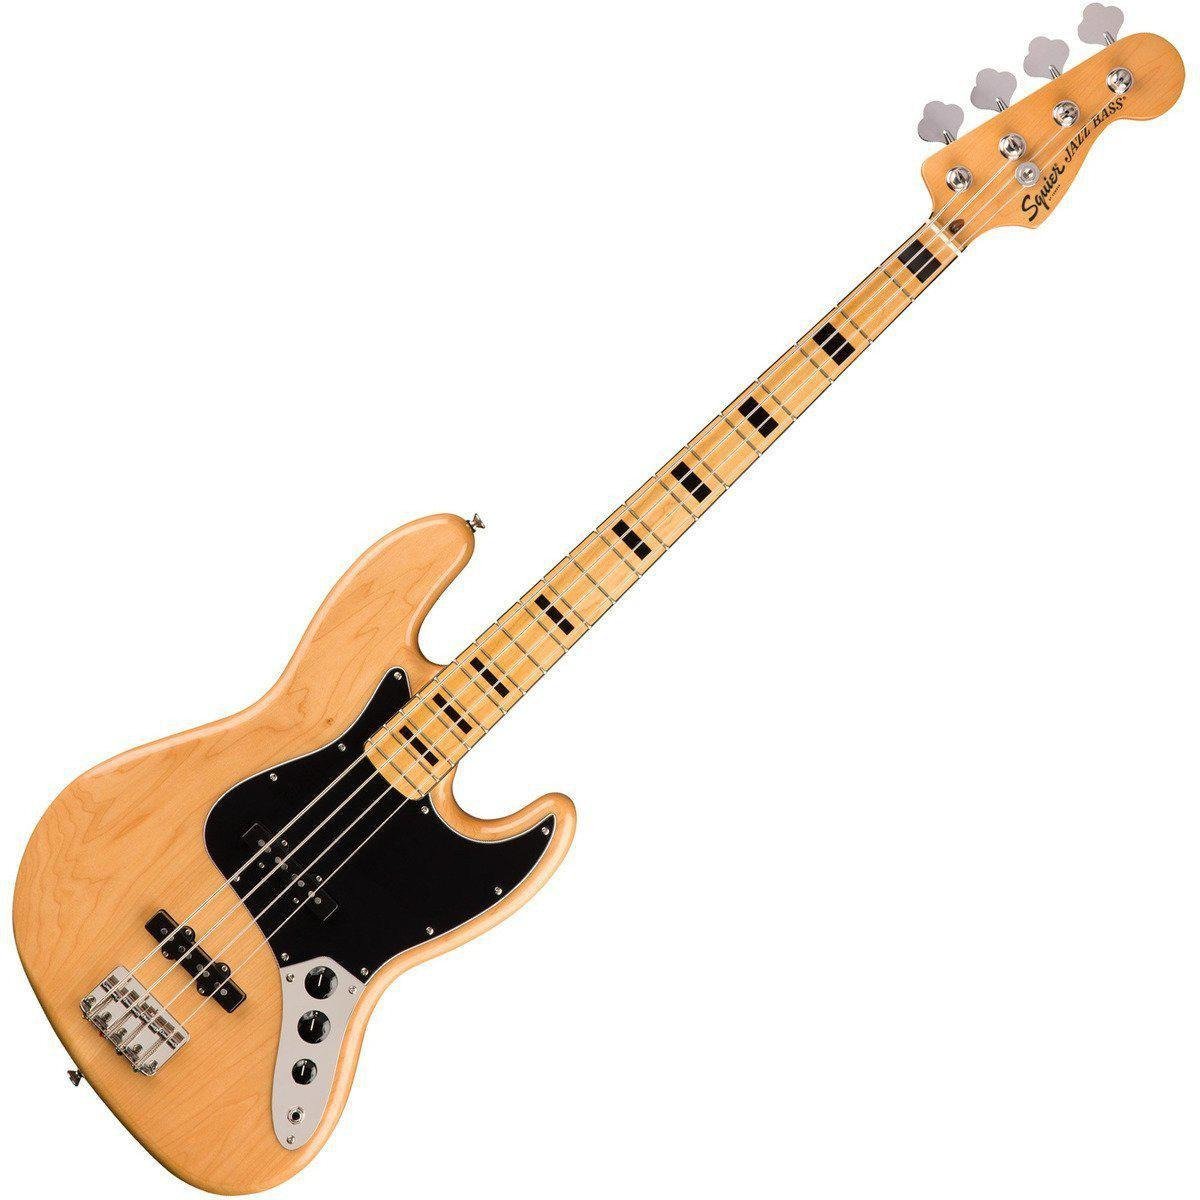 Squier Classic Vibe 70s Jazz Bass Guitar Natural Finish-Natural-Andy's Music